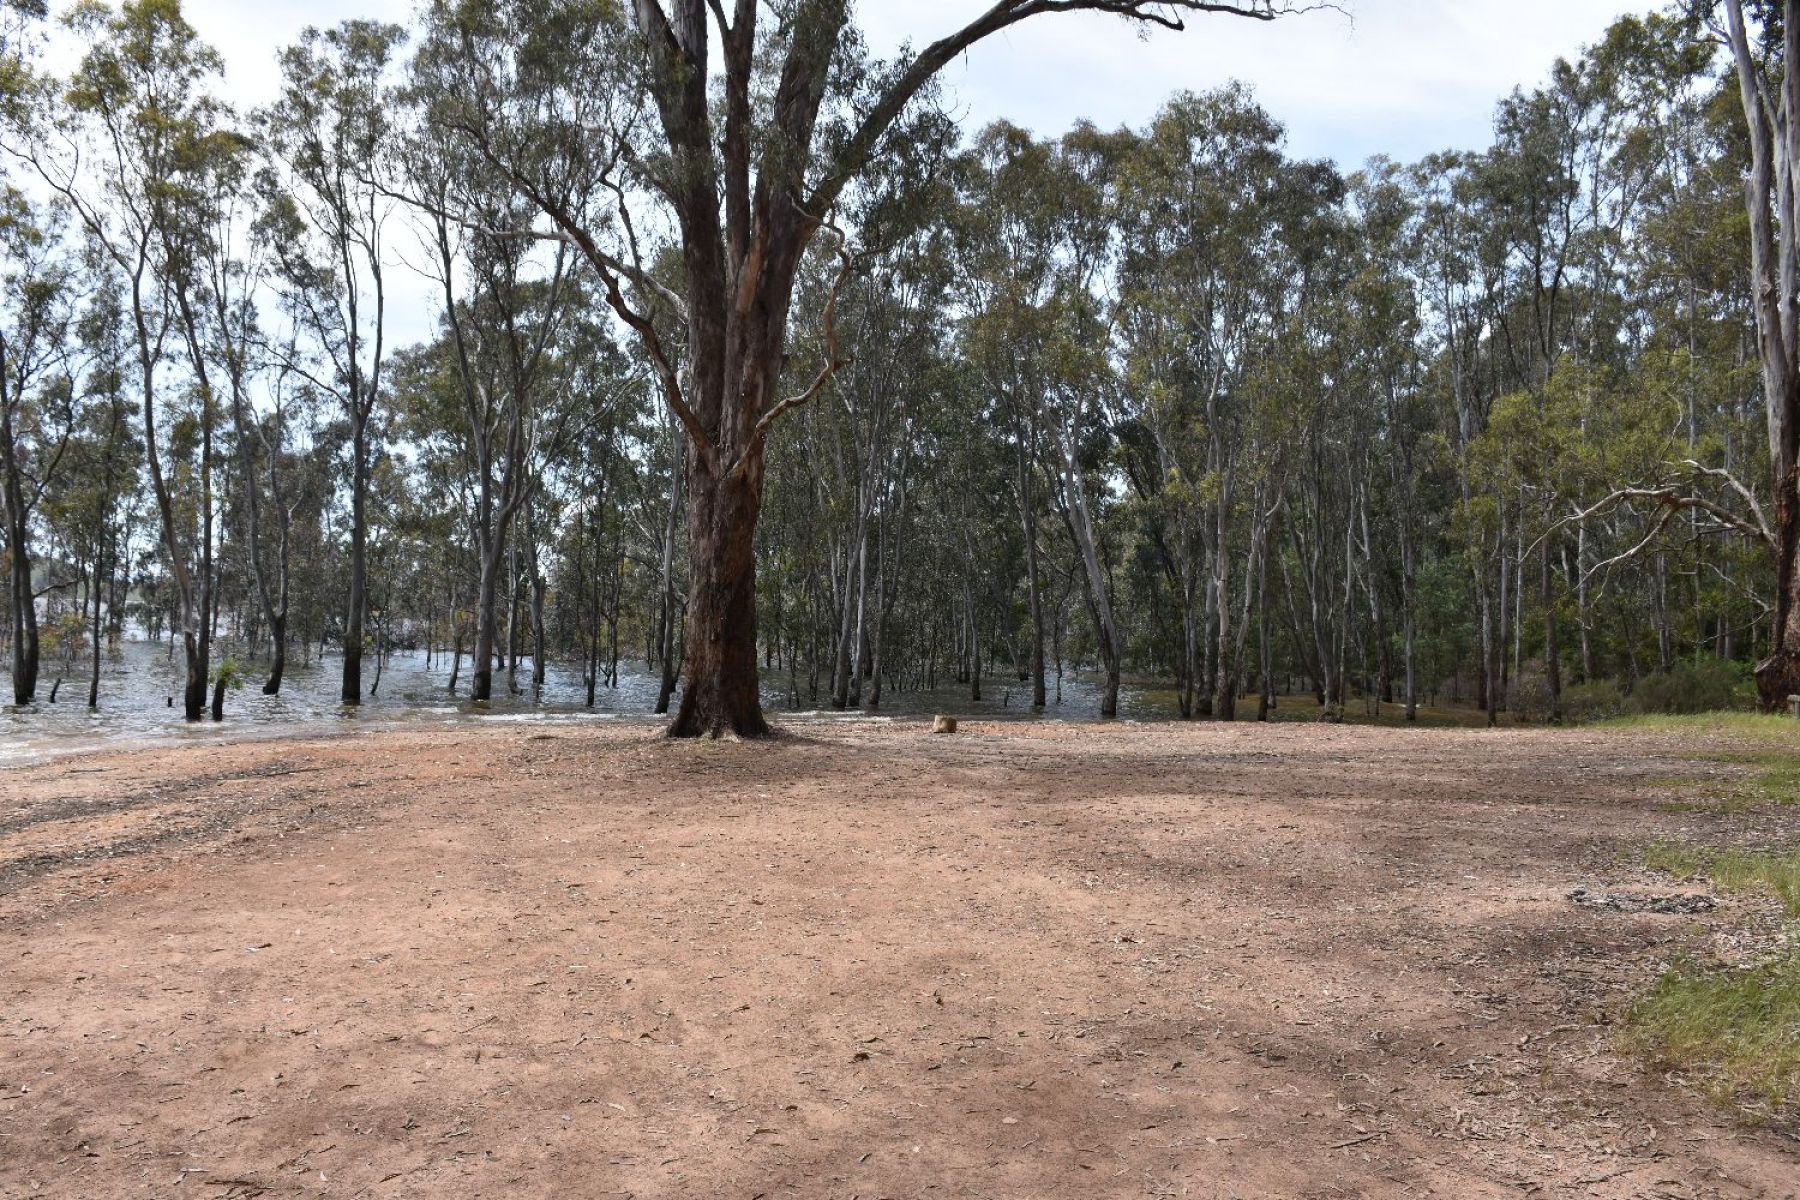 view of the camping area, which is wide open and surrounded by trees, offering plenty of space for your kit 